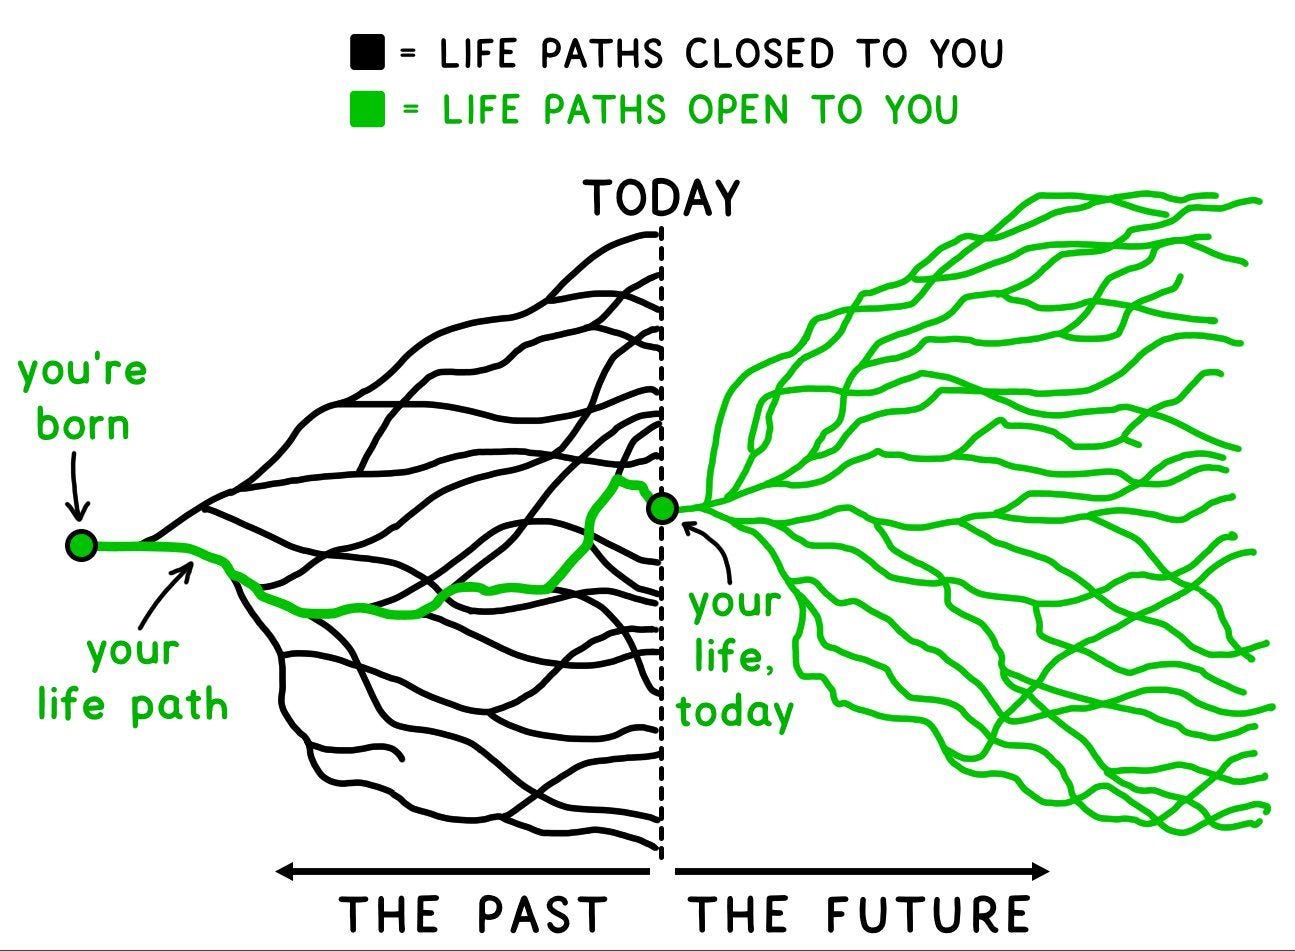 life paths that are opened and closed to you